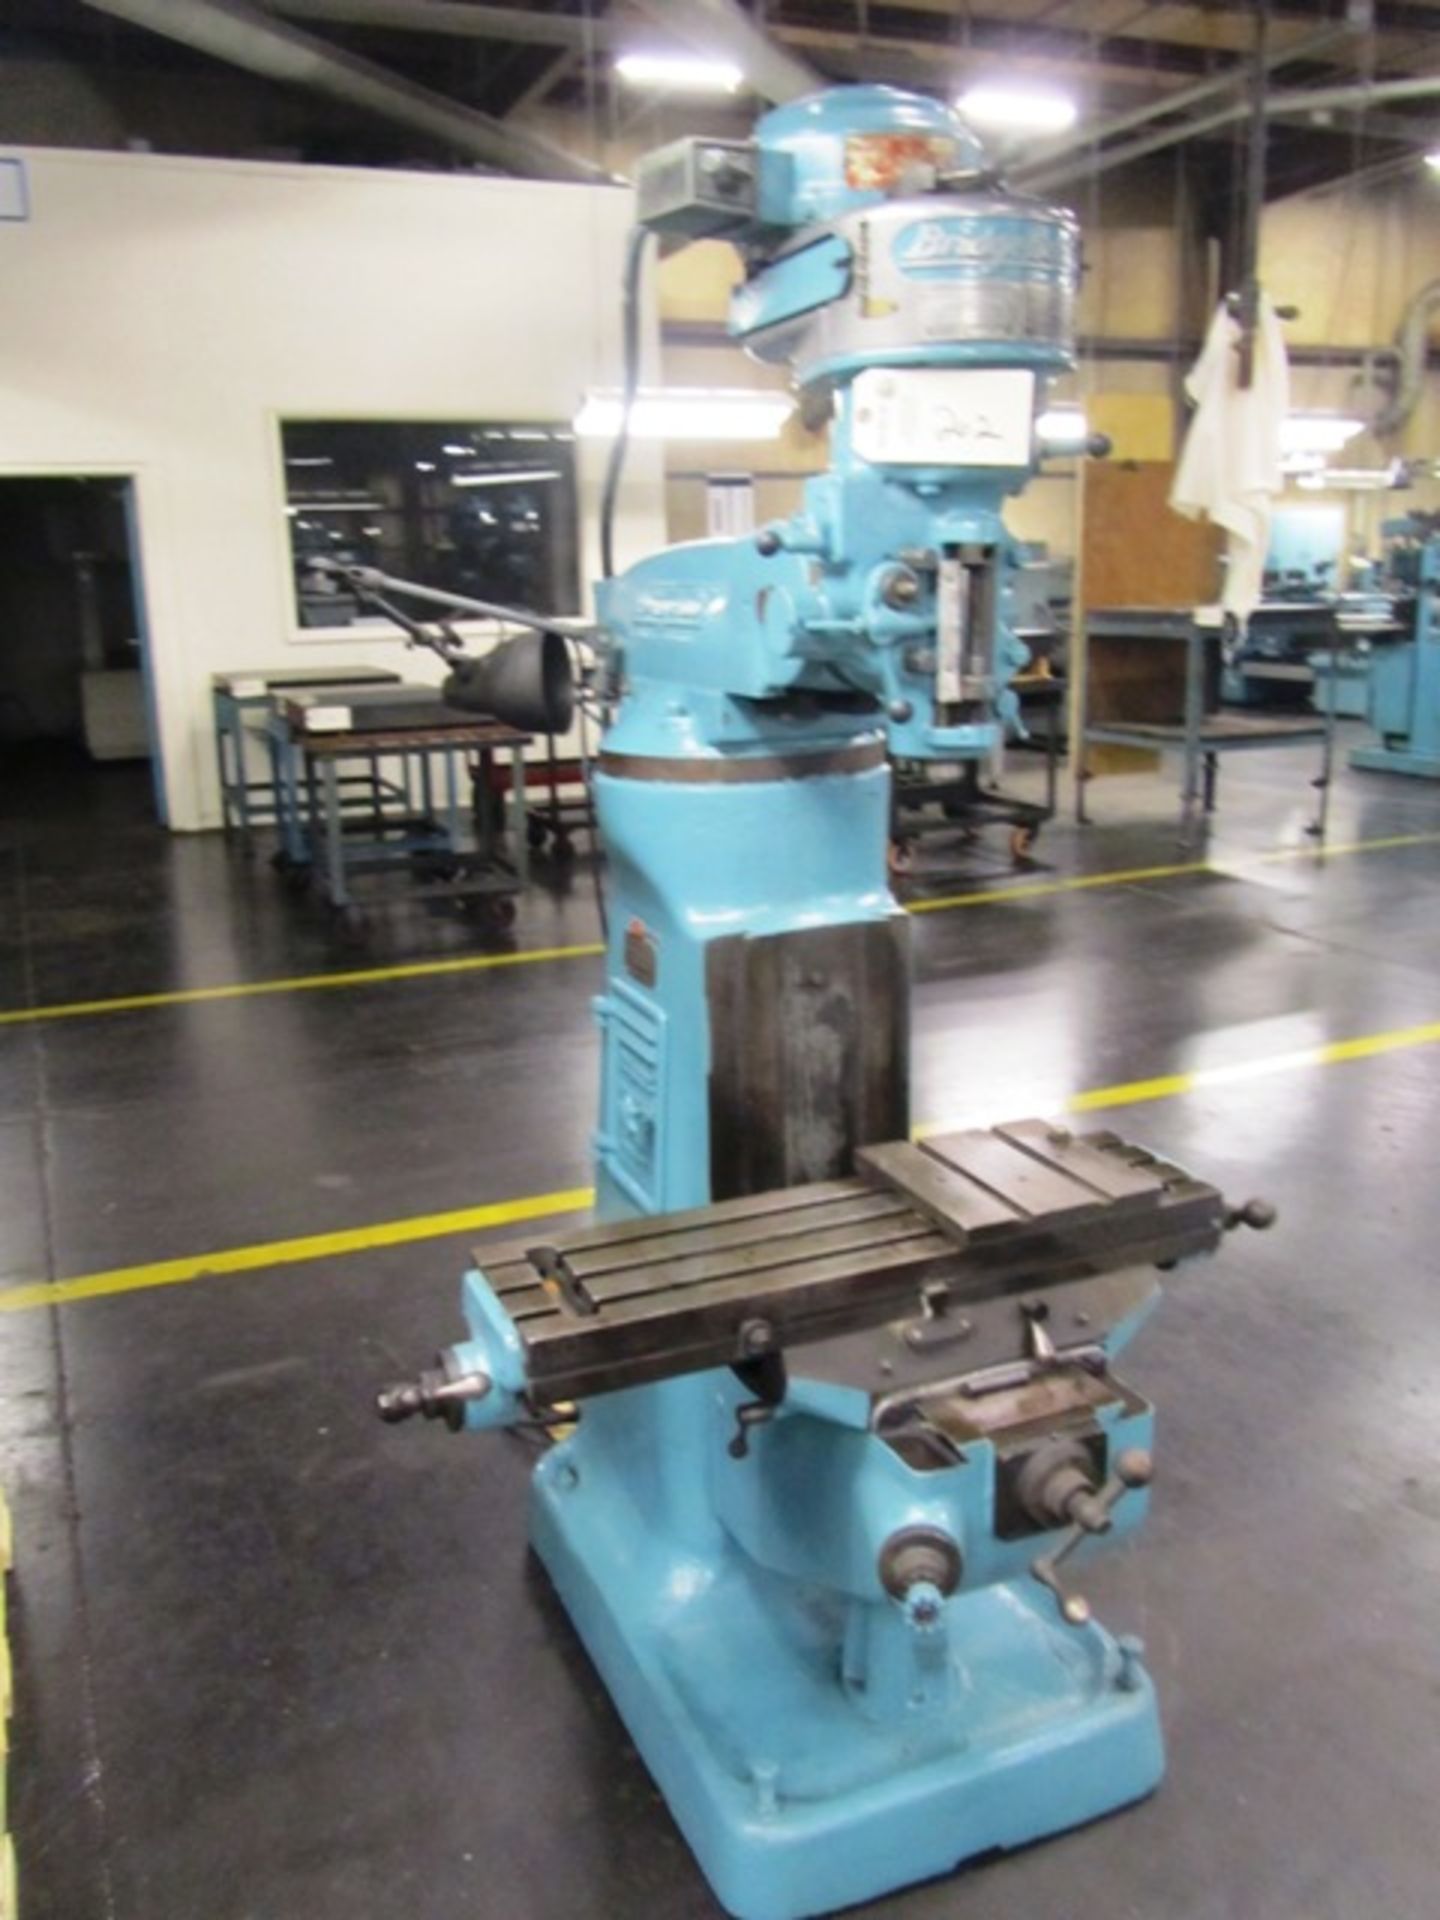 Bridgeport Vertical Milling Machine with 9'' x 32'' T-Slotted Table, R8 Taper, Spindle Speeds to